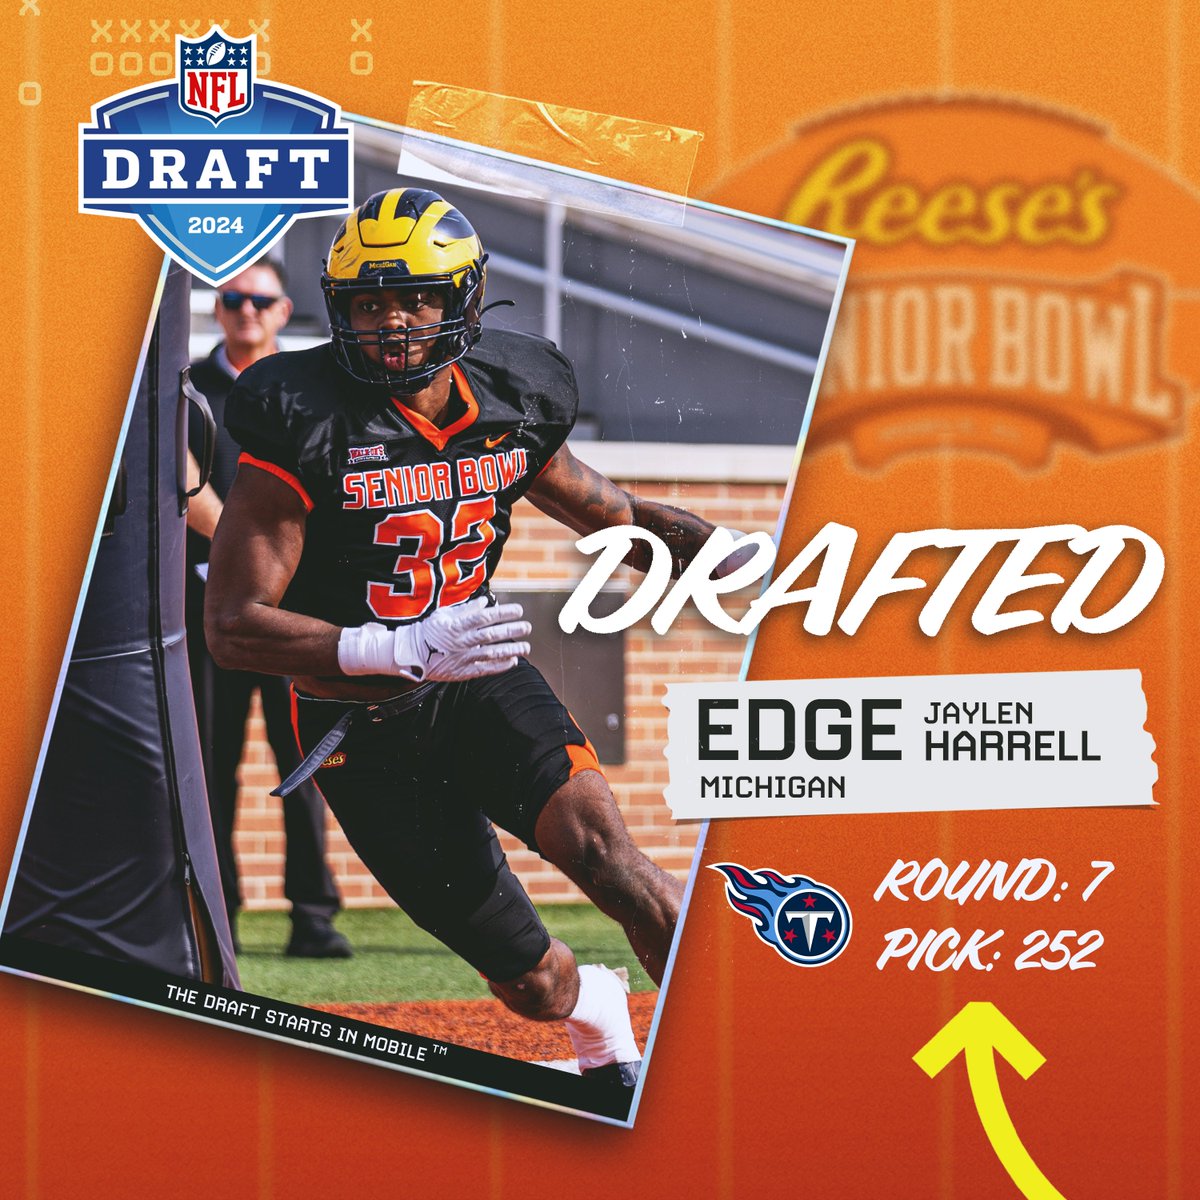 #NFLDraft The @Titans have selected Senior Bowl alum @jayharrell32 out of @UMichFootball. Congratulations! #TitanUp #TheDraftStartsInMOBILE™️